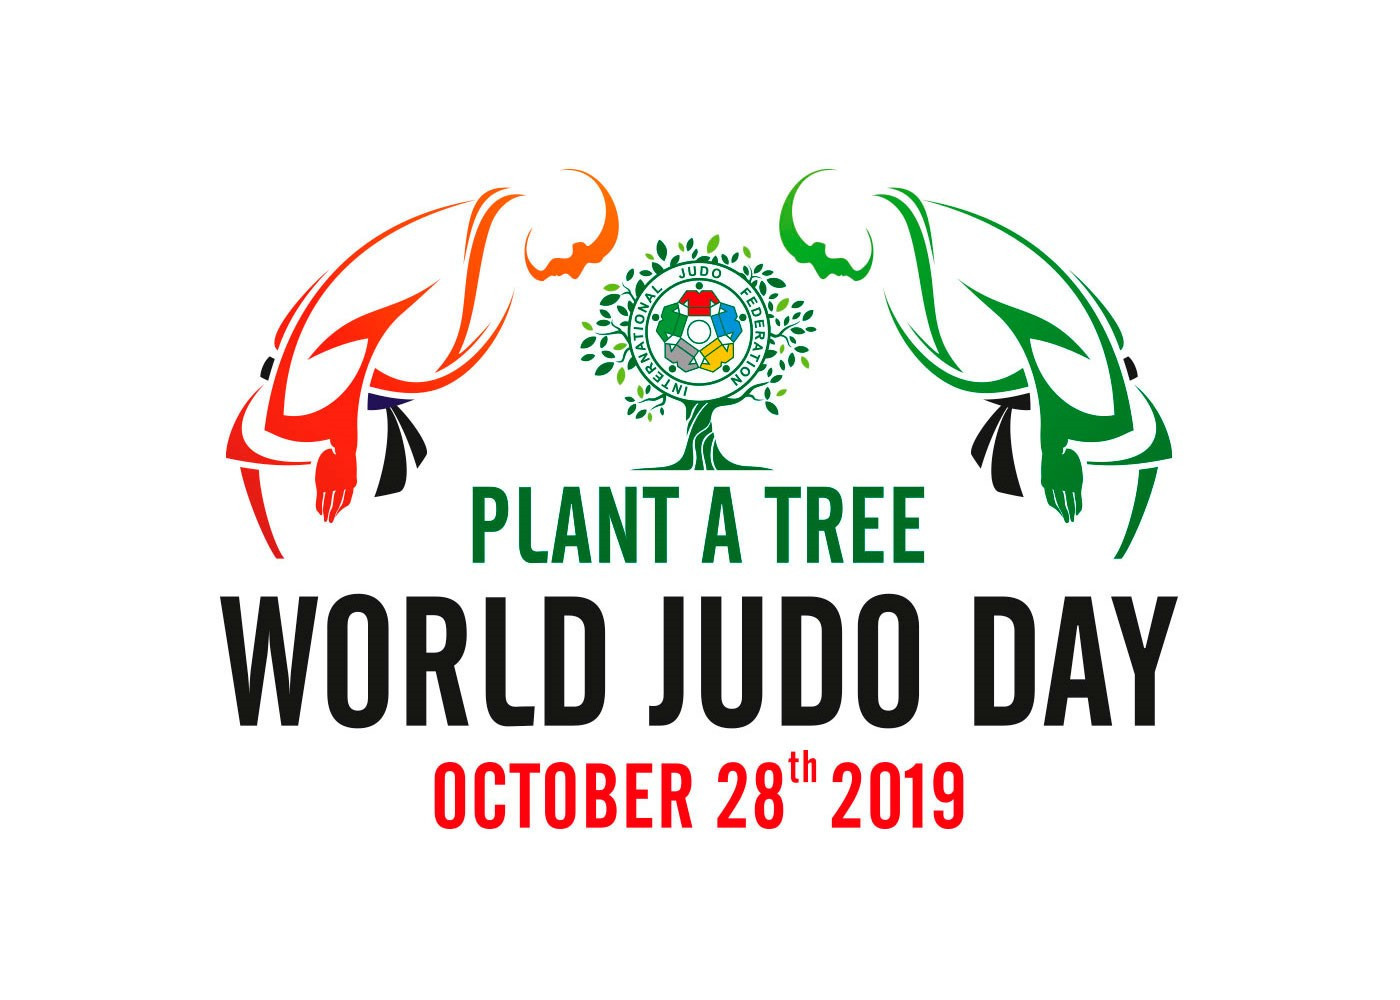 The International Judo Federation is encouraging people to plant trees as part of this year's World Judo Day celebrations ©IJF